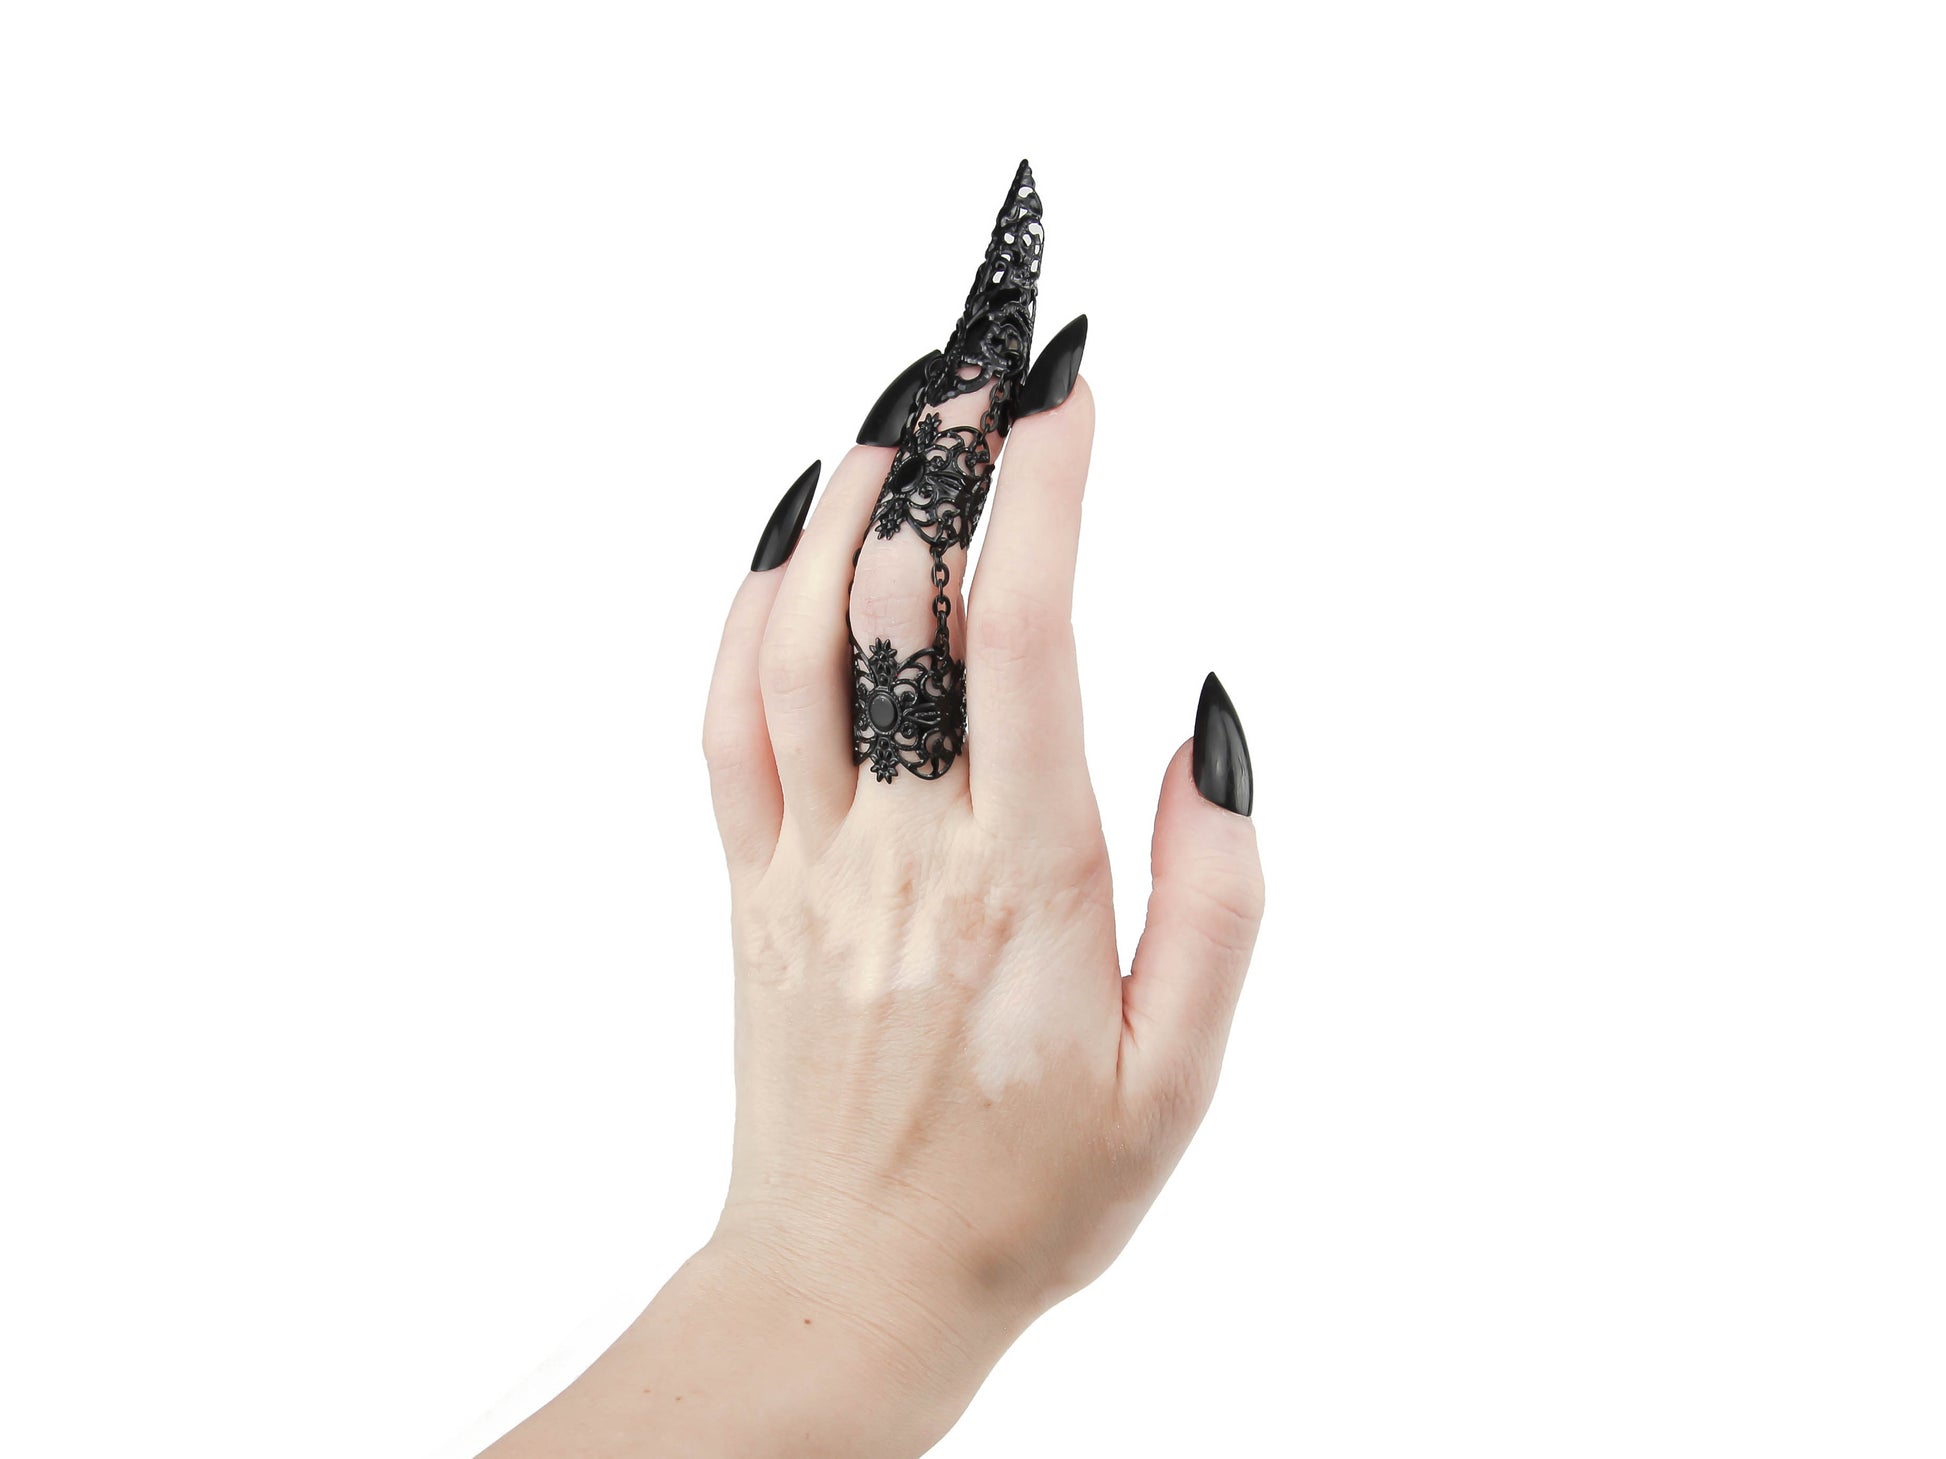 A hand model displays Myril Jewels' full finger black double ring, featuring a luxurious long black claw over the nail part. The claw ring's elaborate gold filigree design embodies the brand's neo-goth style, making it a striking choice for gothic and alternative fashion enthusiasts. It's a versatile piece that fits seamlessly into a collection of Halloween jewelry, adds an edge to everyday minimal goth attire, and serves as a statement piece for rave party jewelry or festival jewels.